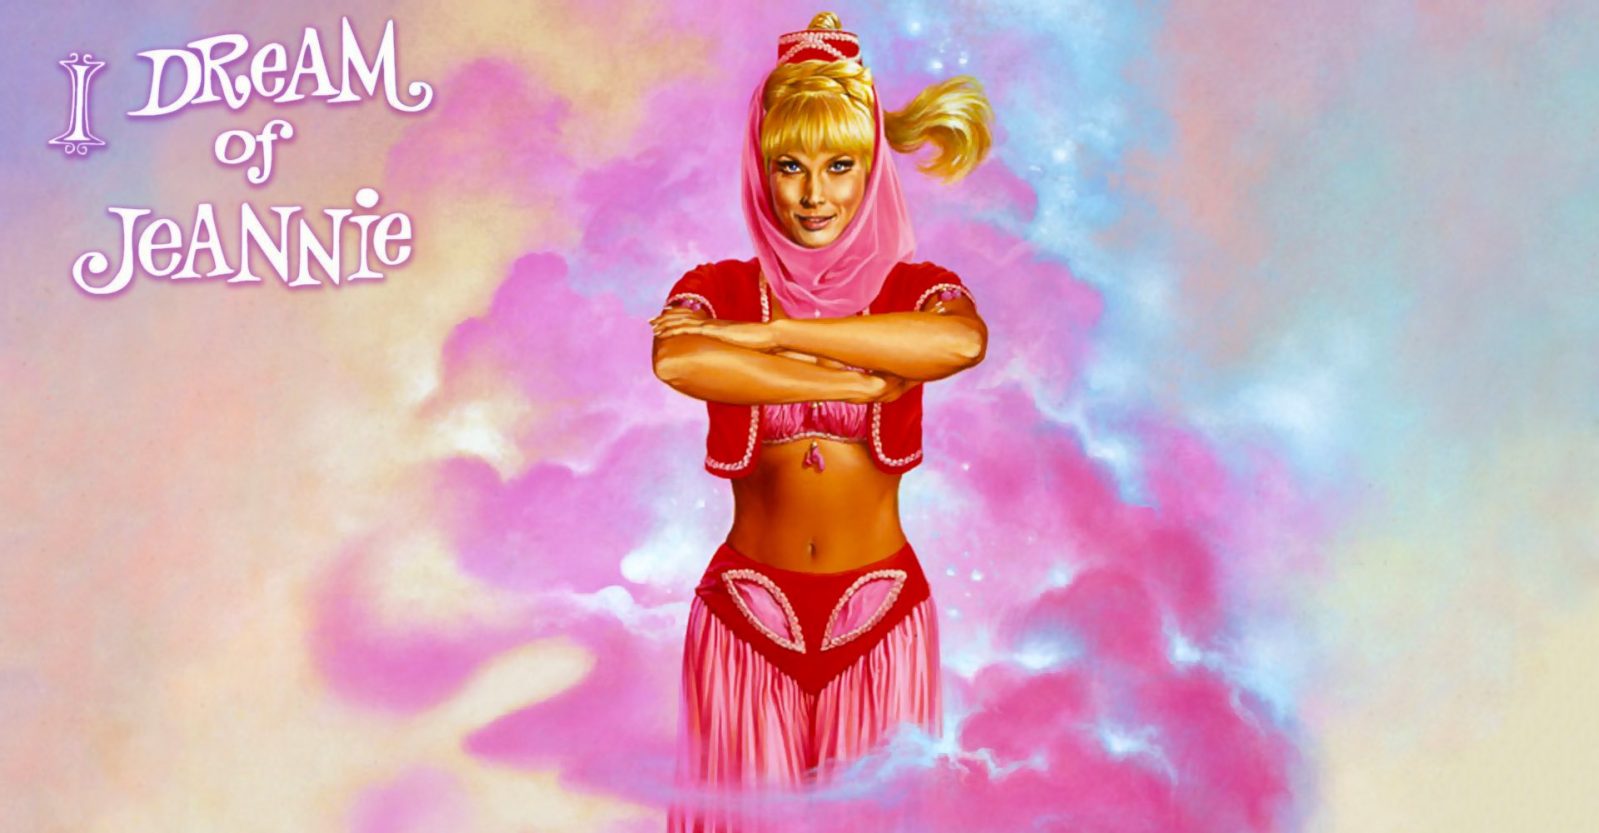 What Does Your Taste in Classic TV Shows Say About You? I Dream of Jeannie